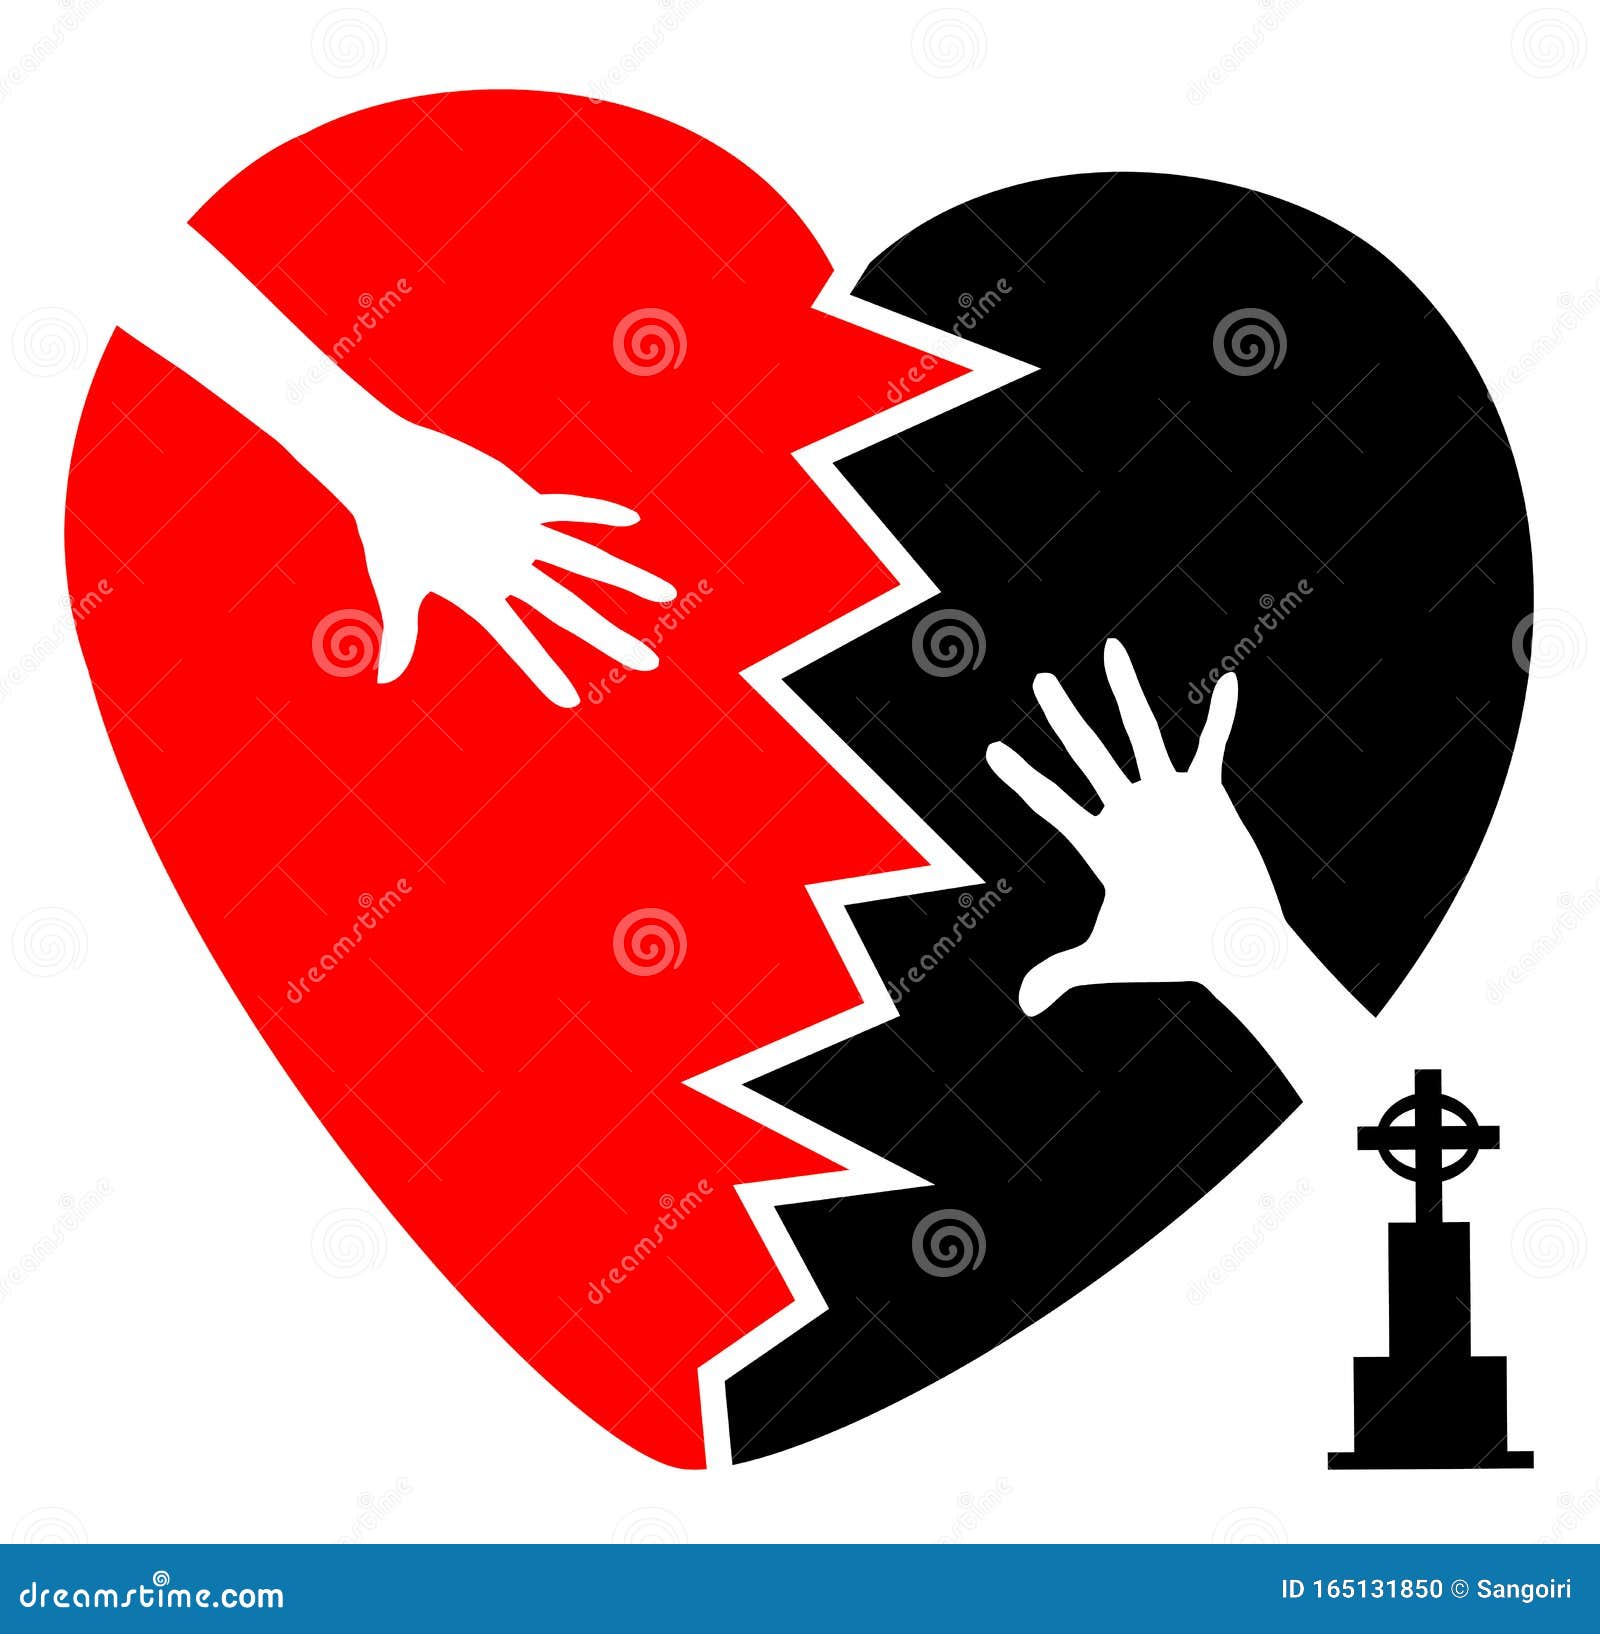 Death Loved One Stock Illustrations 45 Death Loved One Stock Illustrations Vectors Clipart Dreamstime